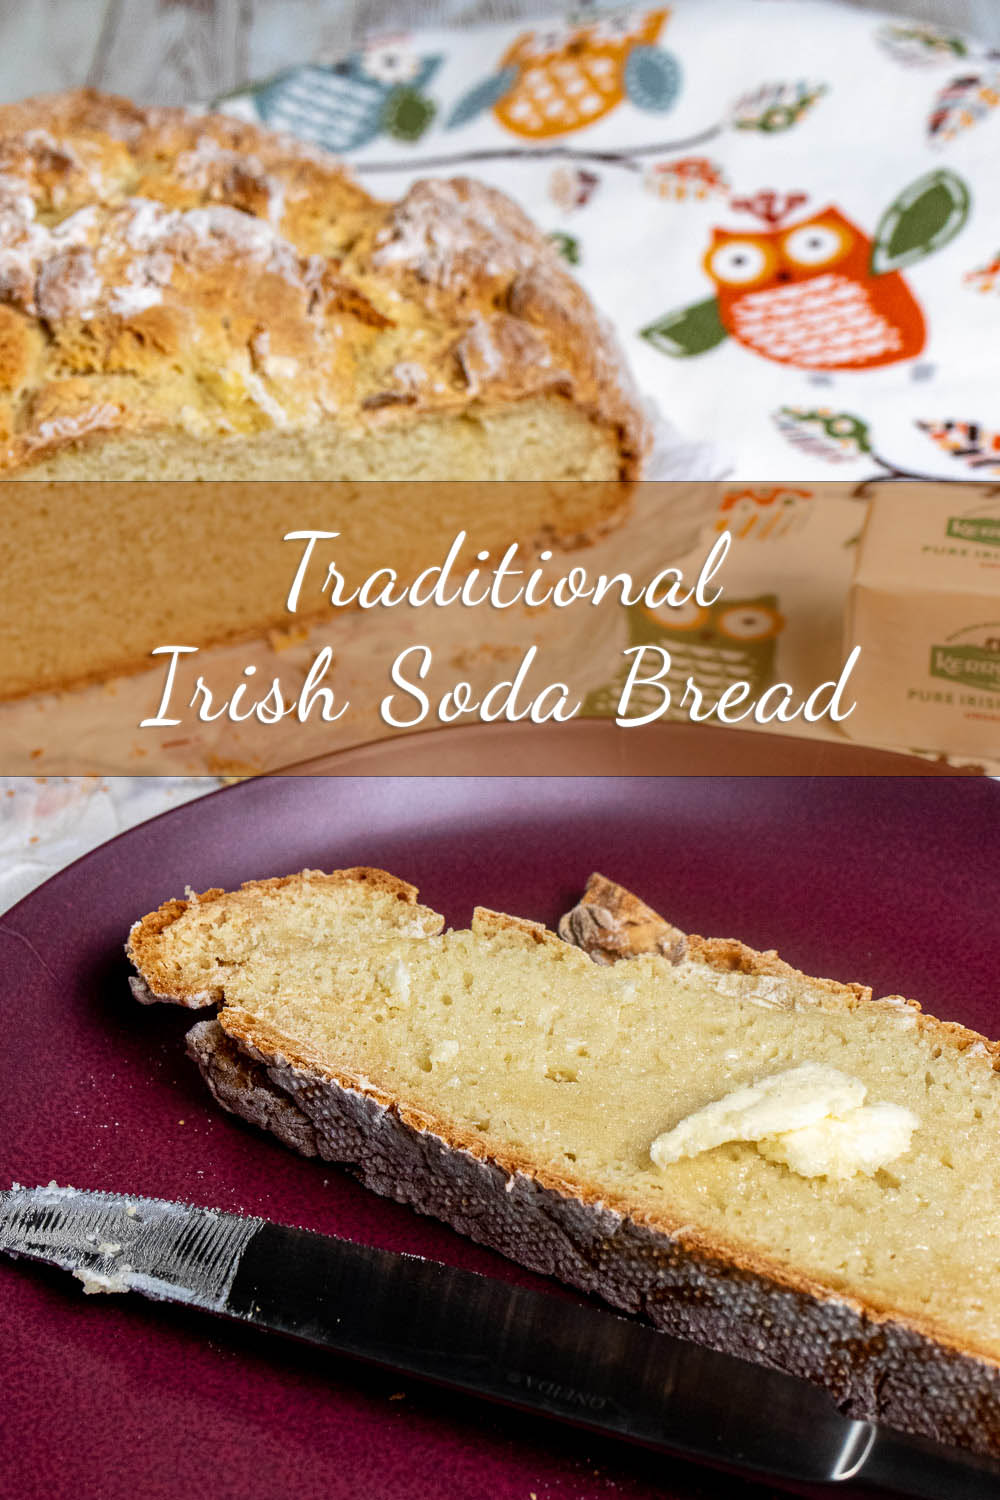 slice of buttered Irish soda bread on a red plate